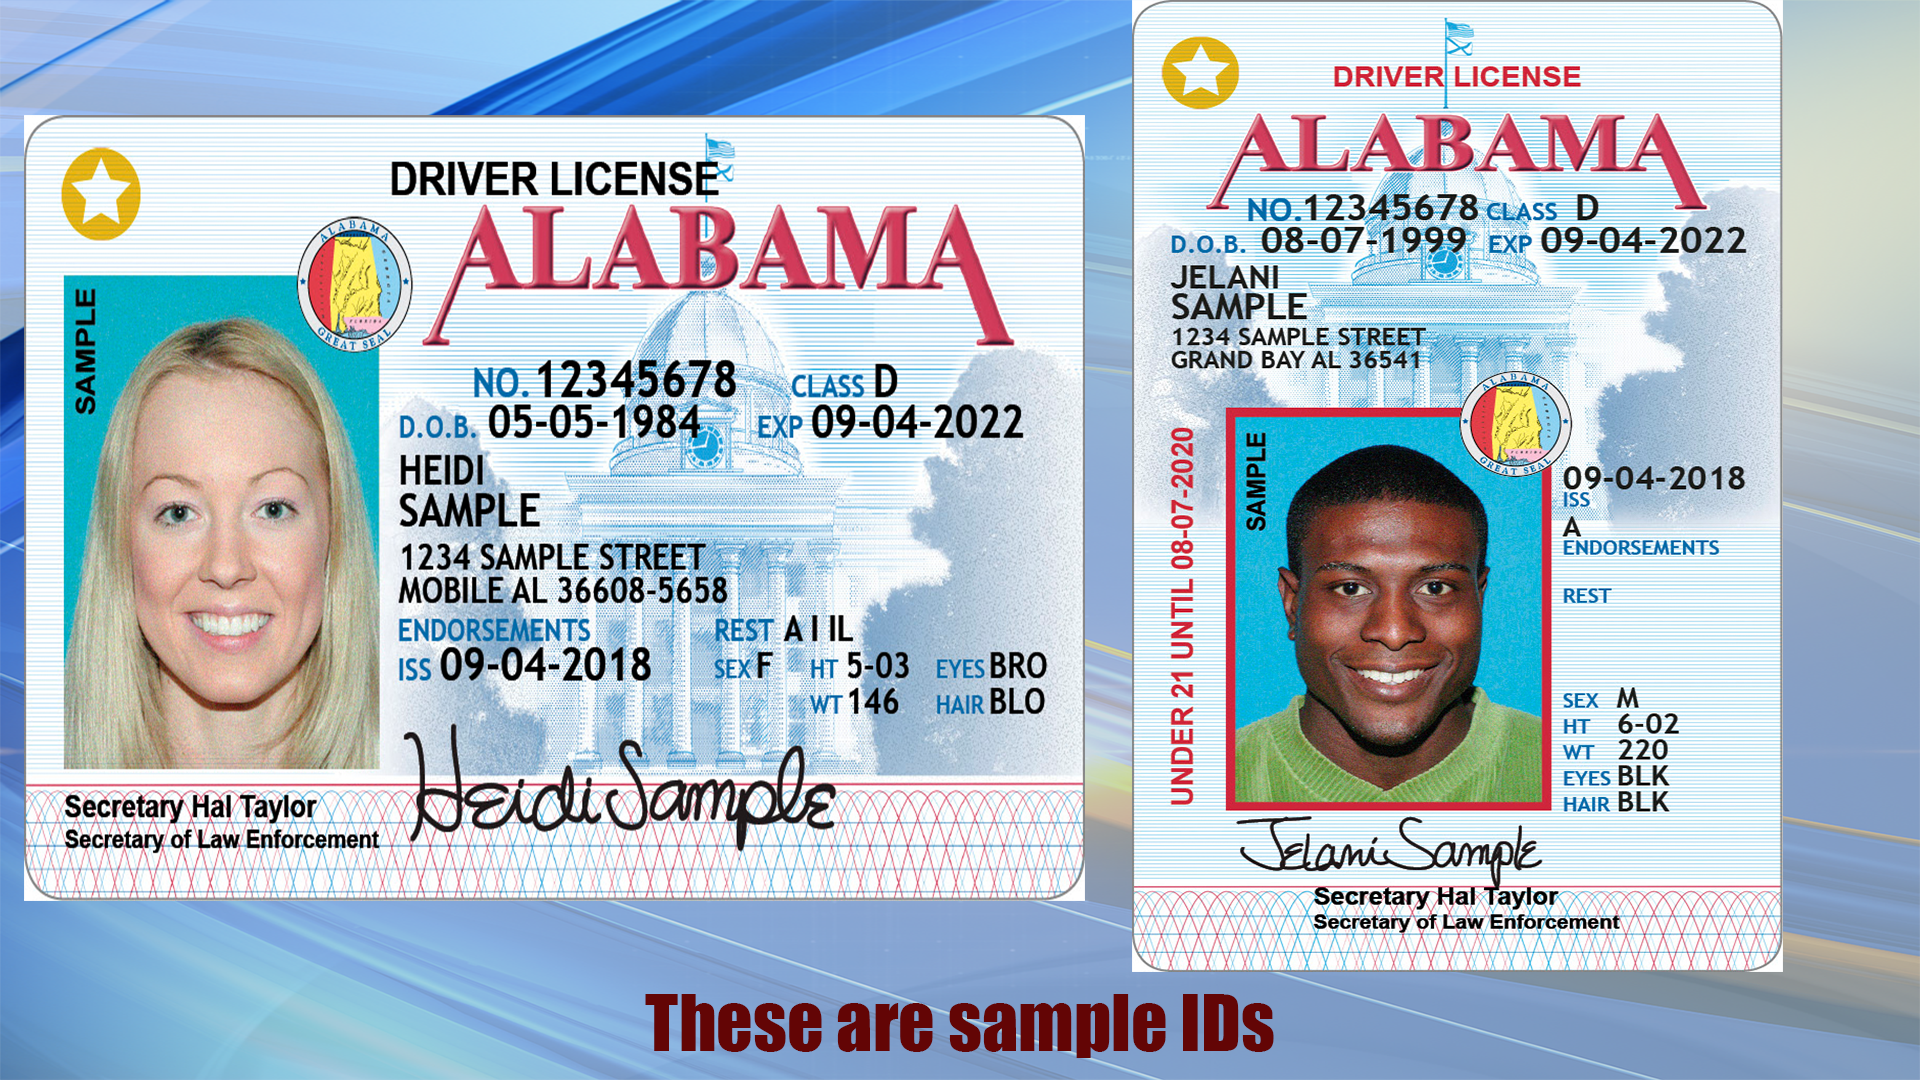 acquiring a driver's license in alabama quizlet